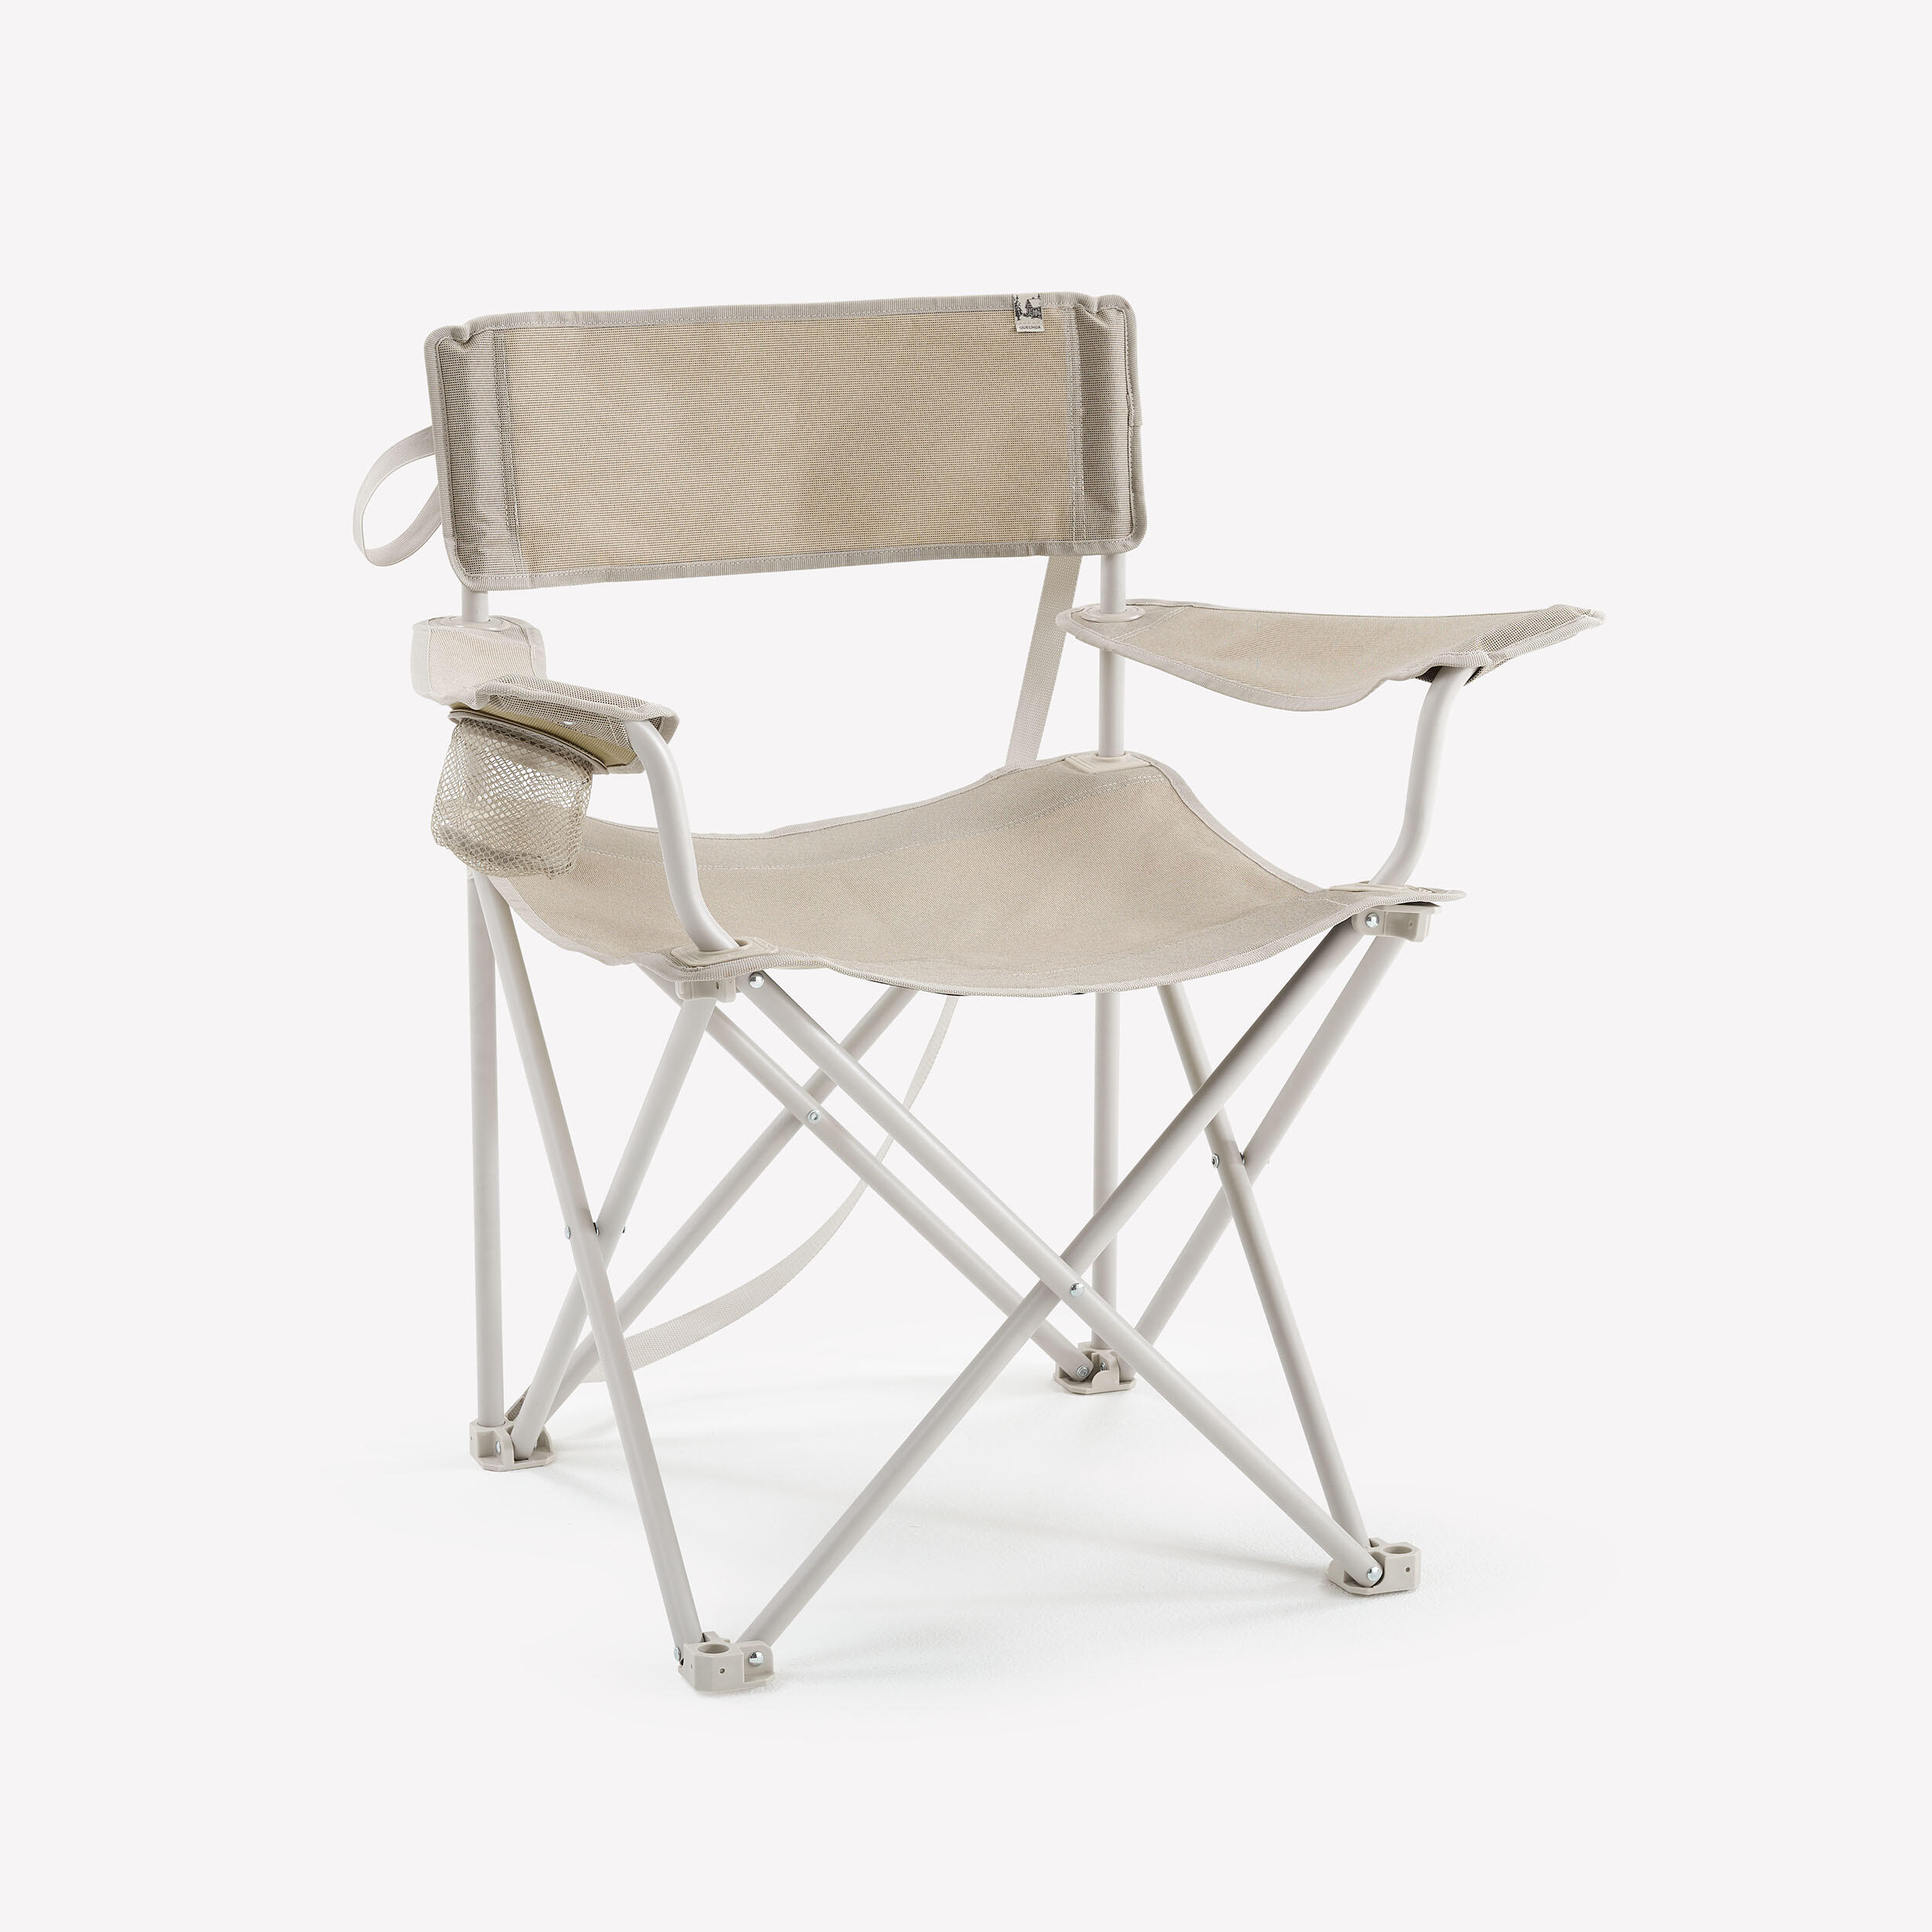 Camping Large Folding Armchair - Beige